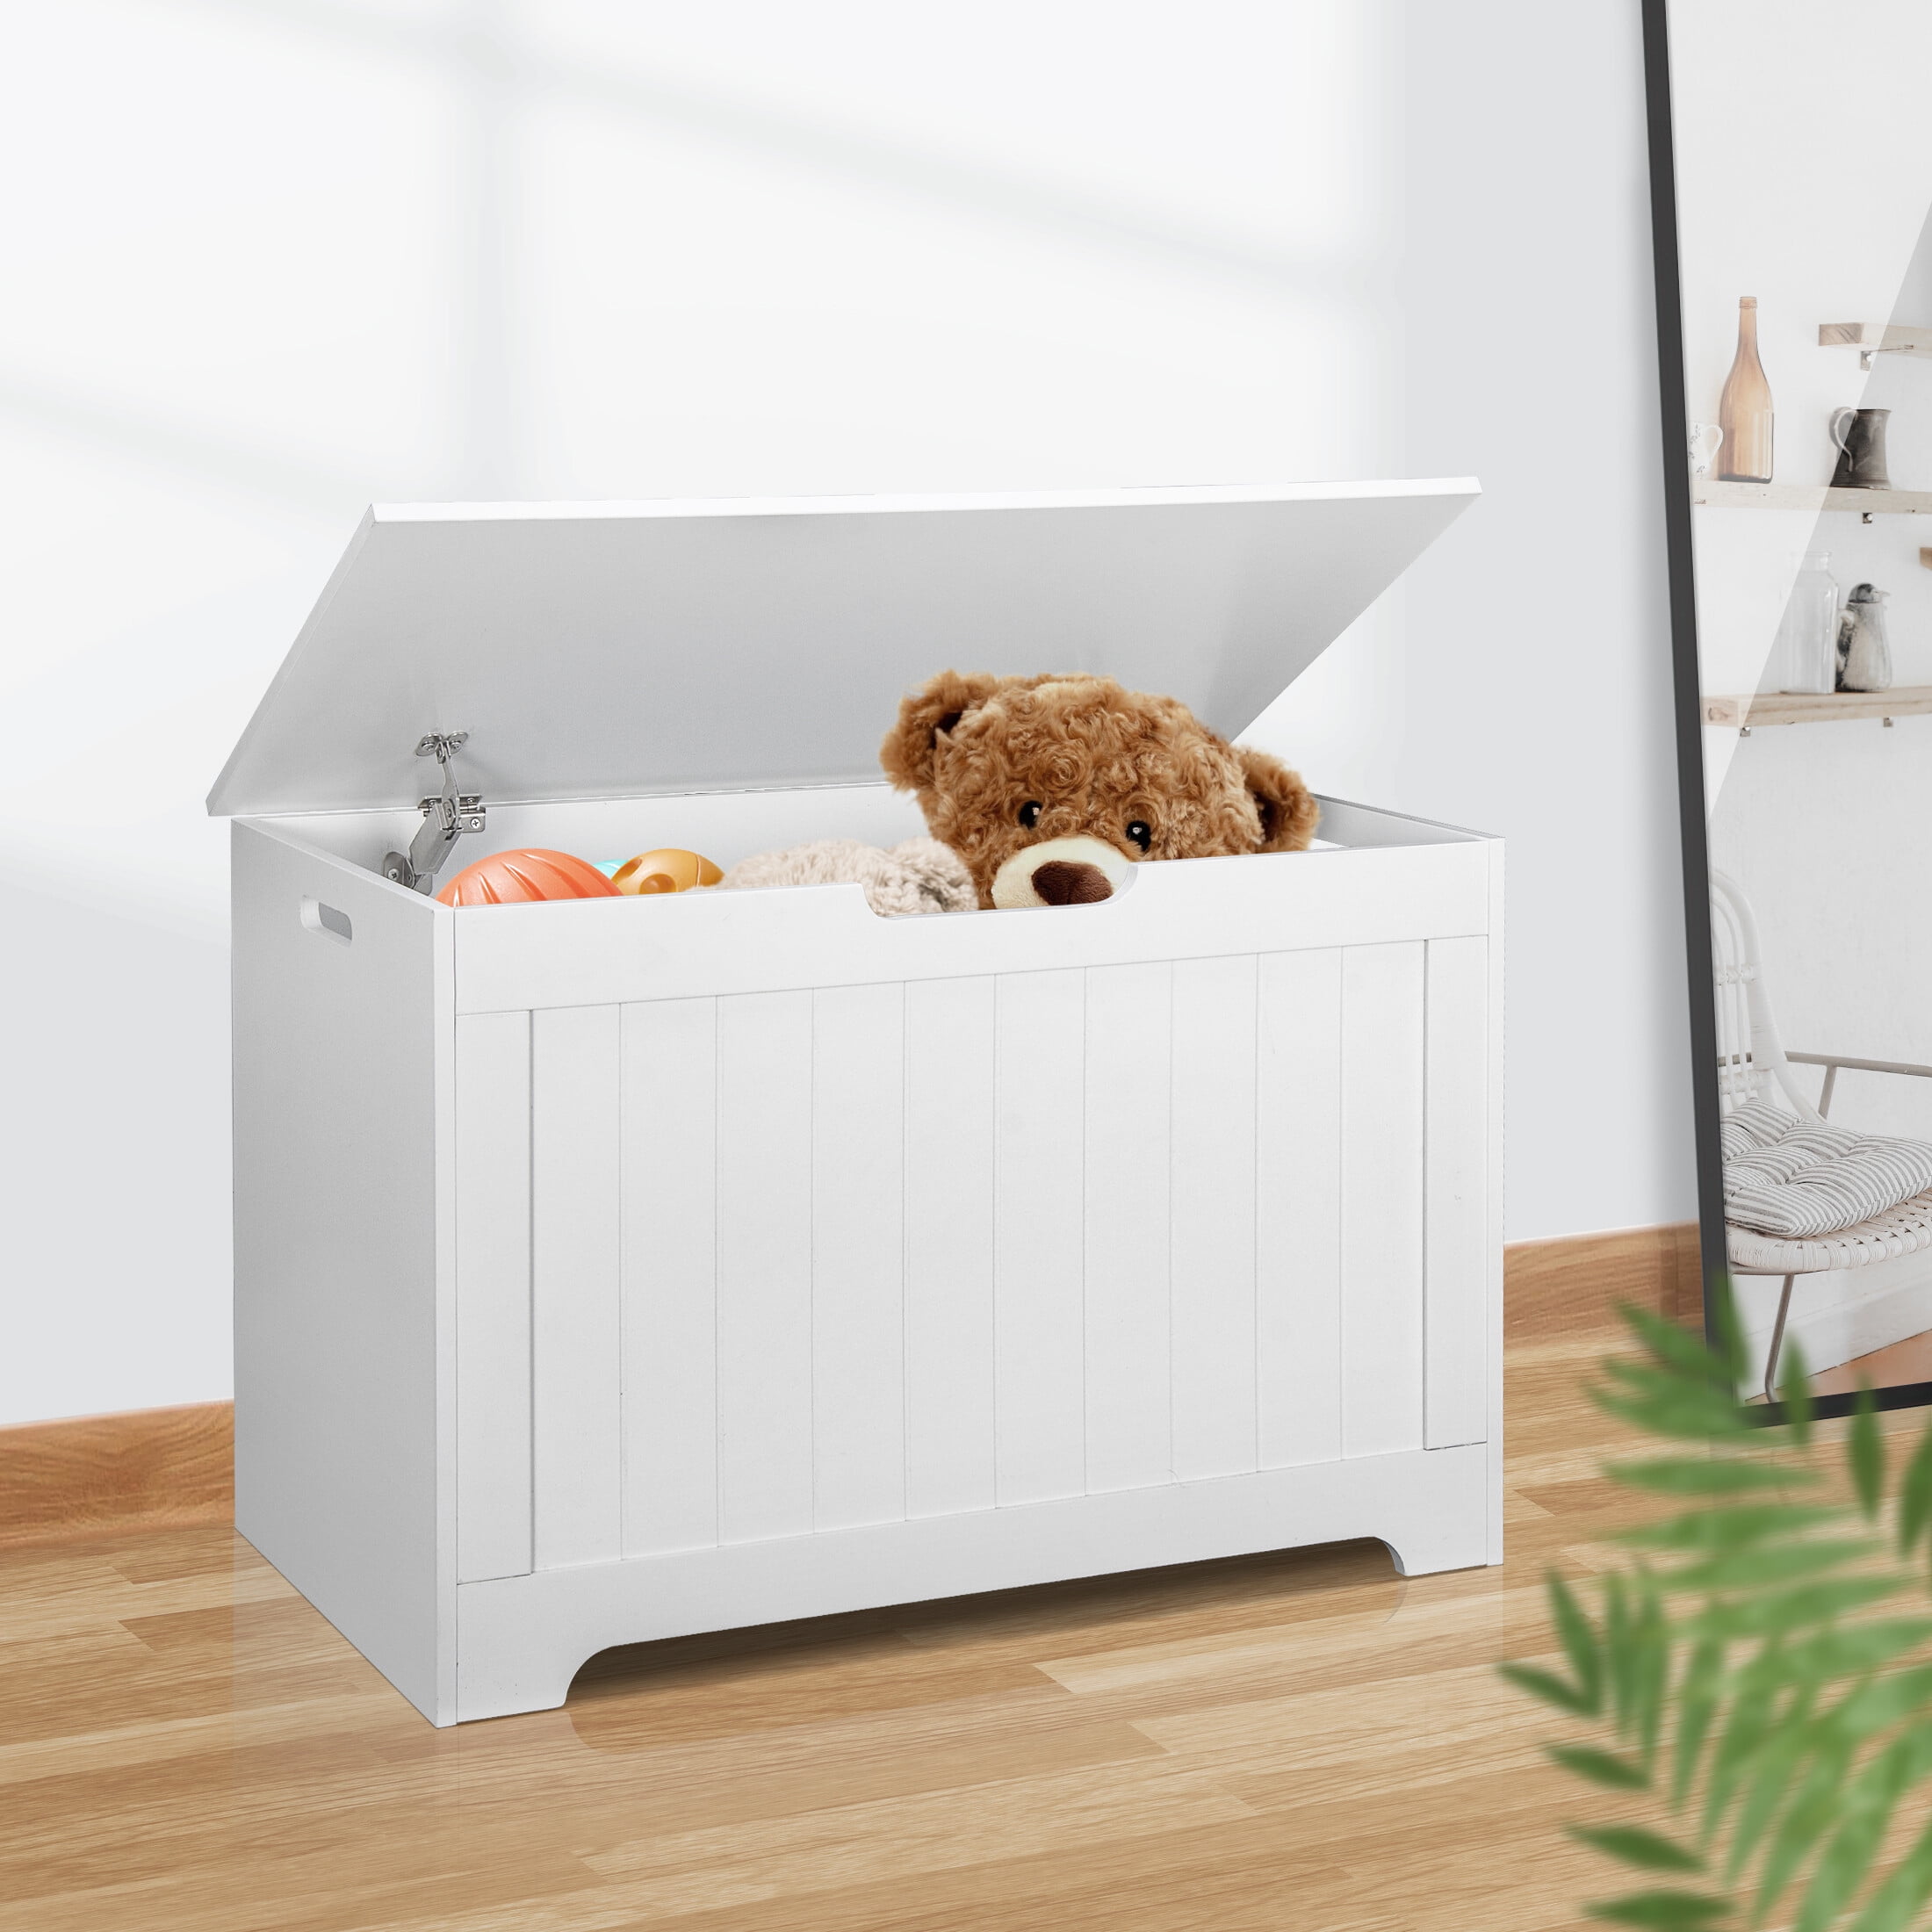 Large Cute and Functional Toy Box Storage Cube with Handles Yosayd Unicorn Toy Chest and Storage